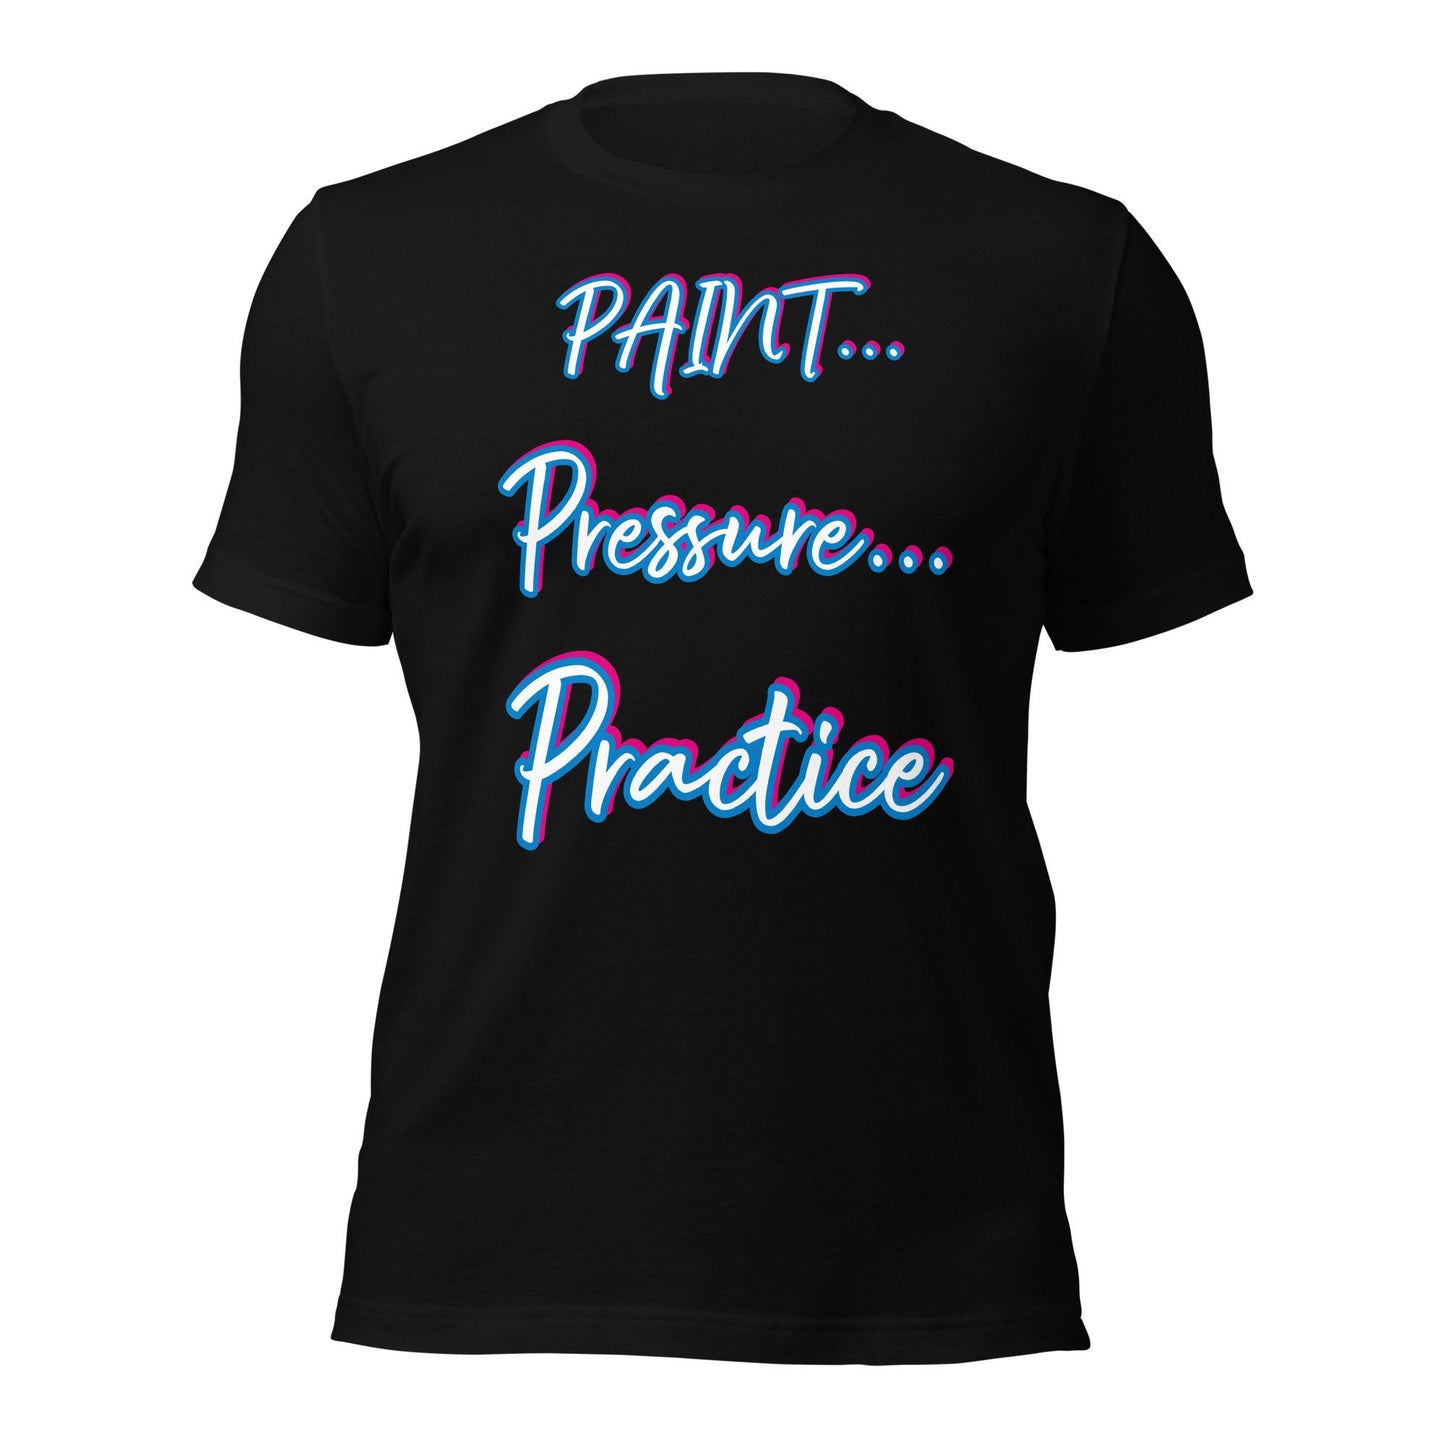 Clothing - T Shirt - Paint Pressure Practice by PaintWithJosh